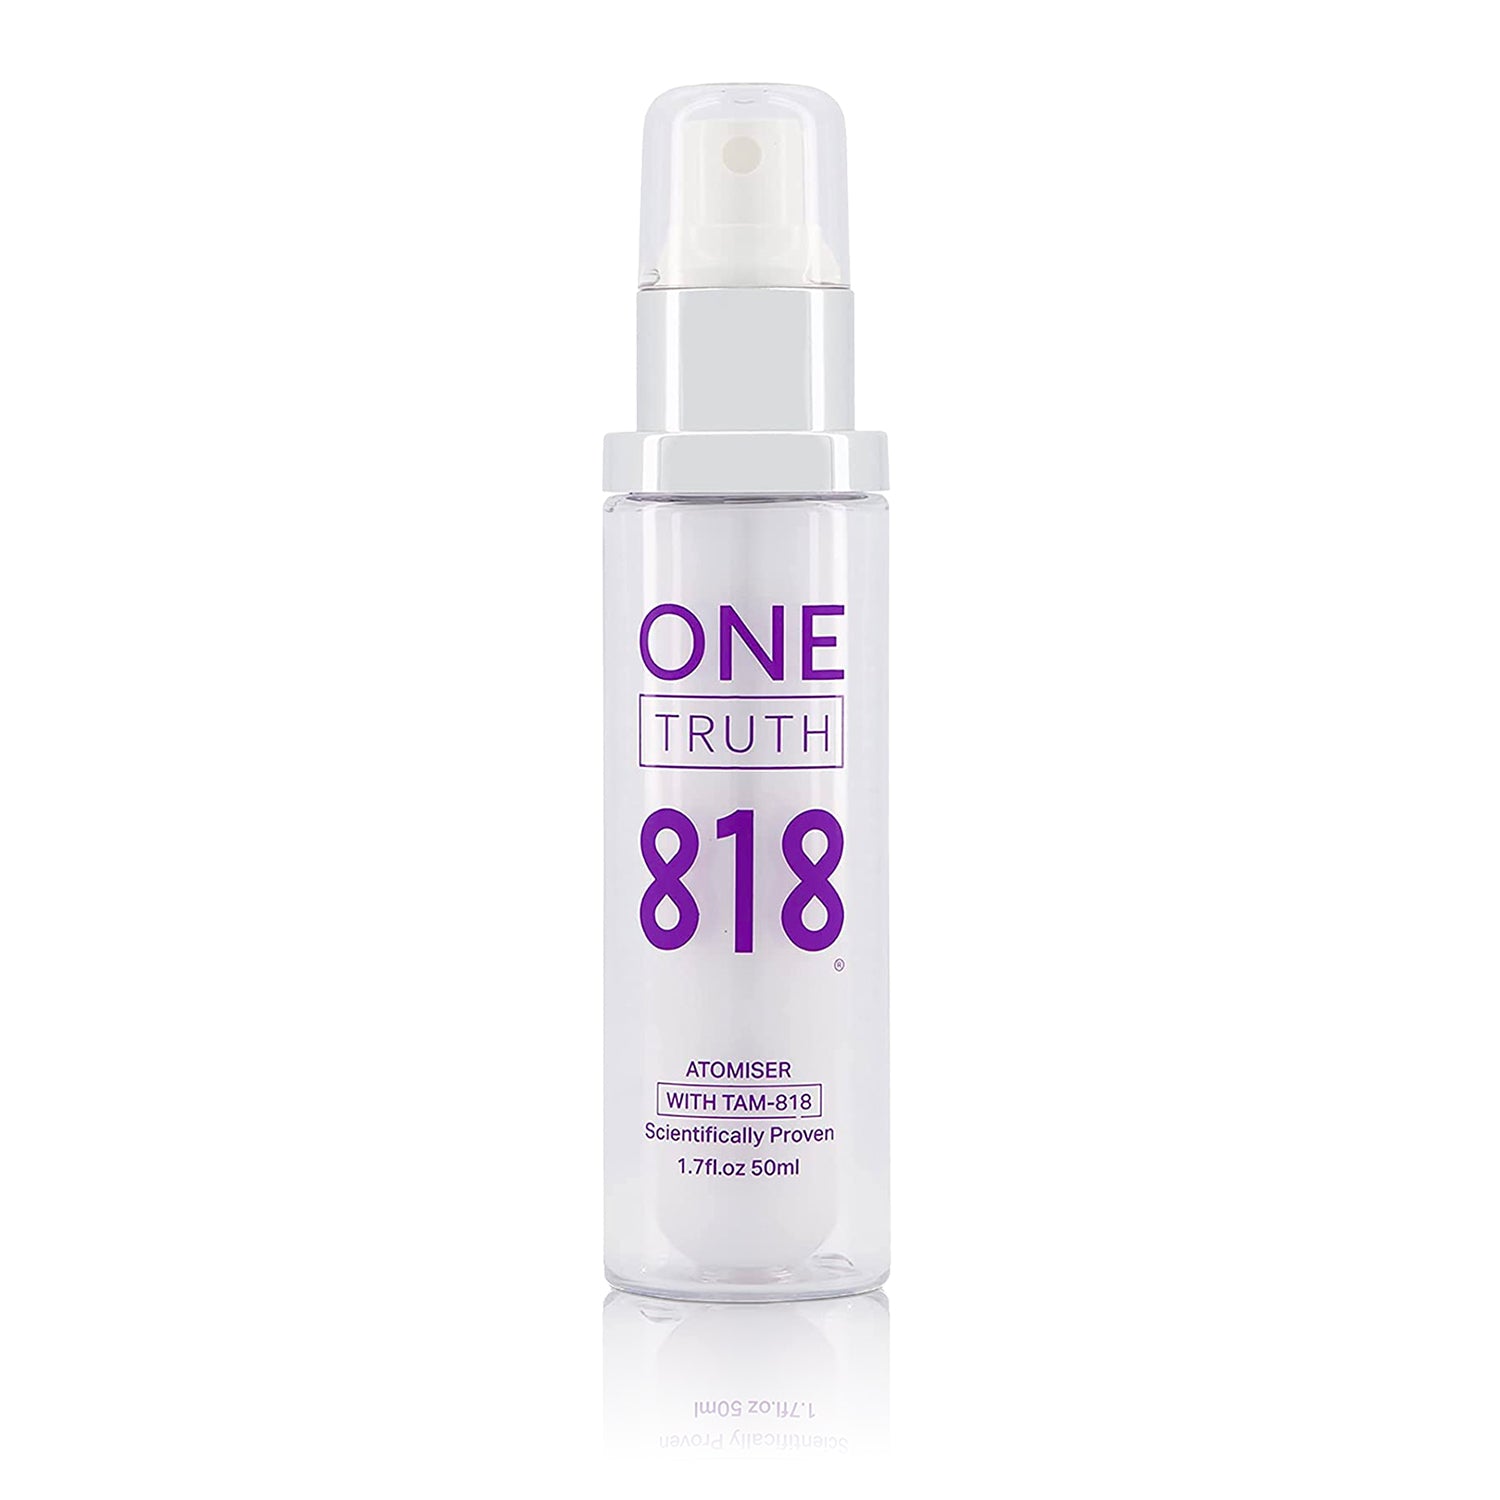 One Truth 818 Anti-Aging Spritz Atomizer - Hydrating Facial Mist